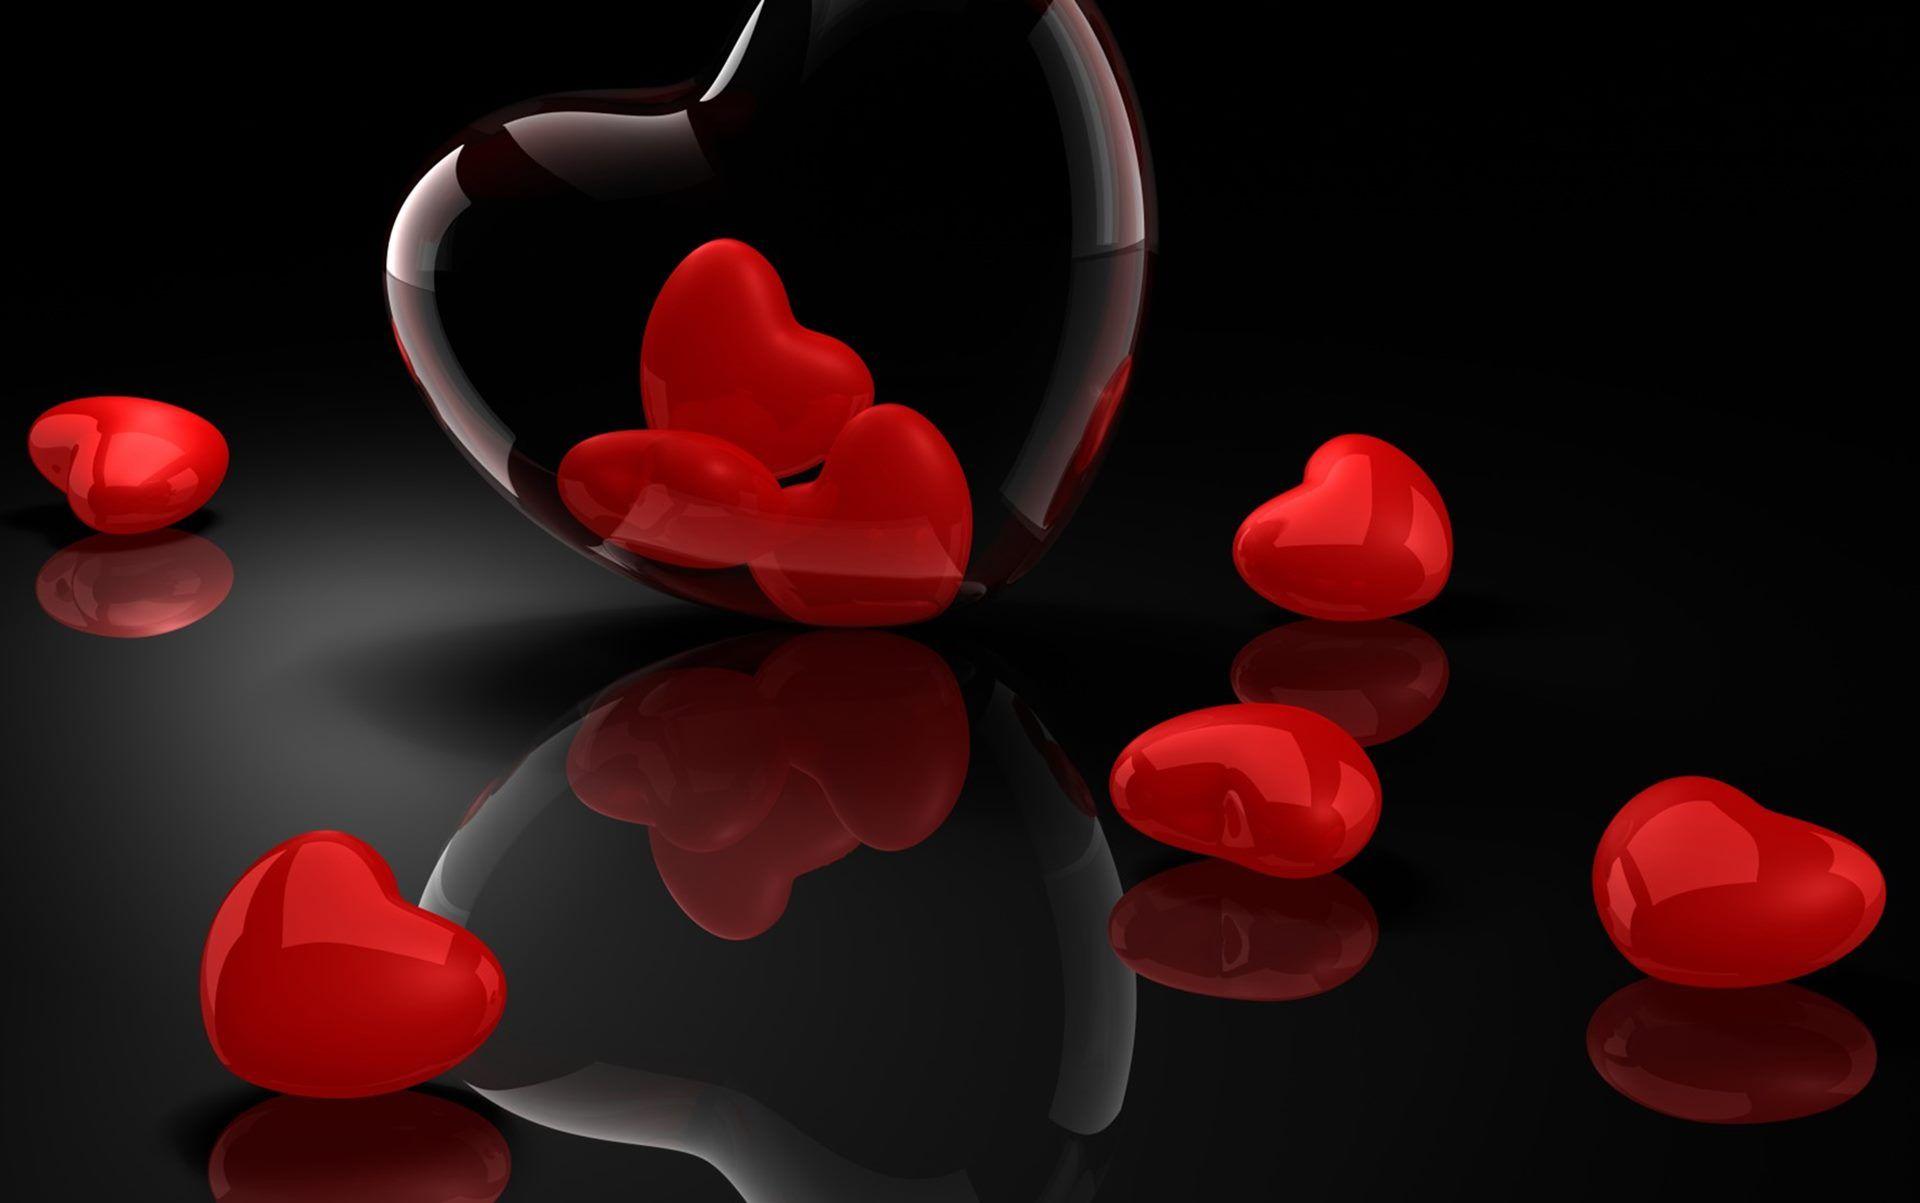 Beautiful Heart Images Wallpapers Wallpapers